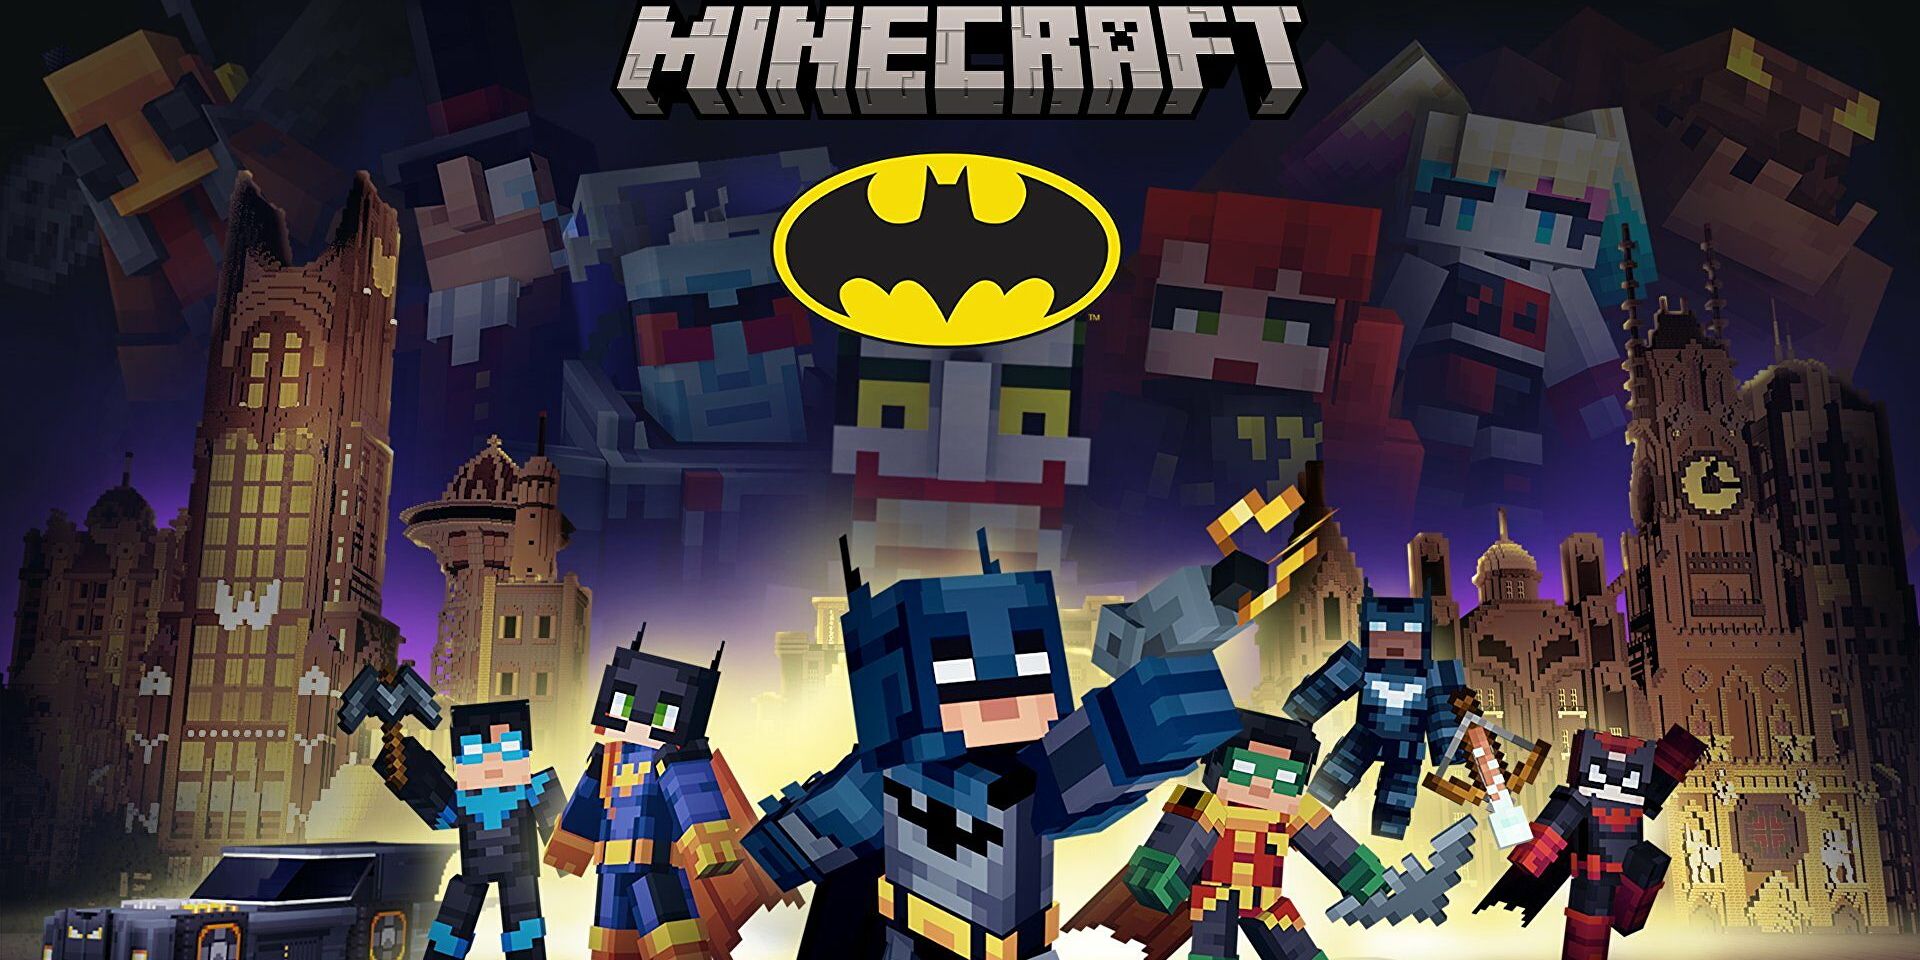 Promotional artwork for the Minecraft Batman DLC featuring all the Batman characters and buildings in minecraft block style